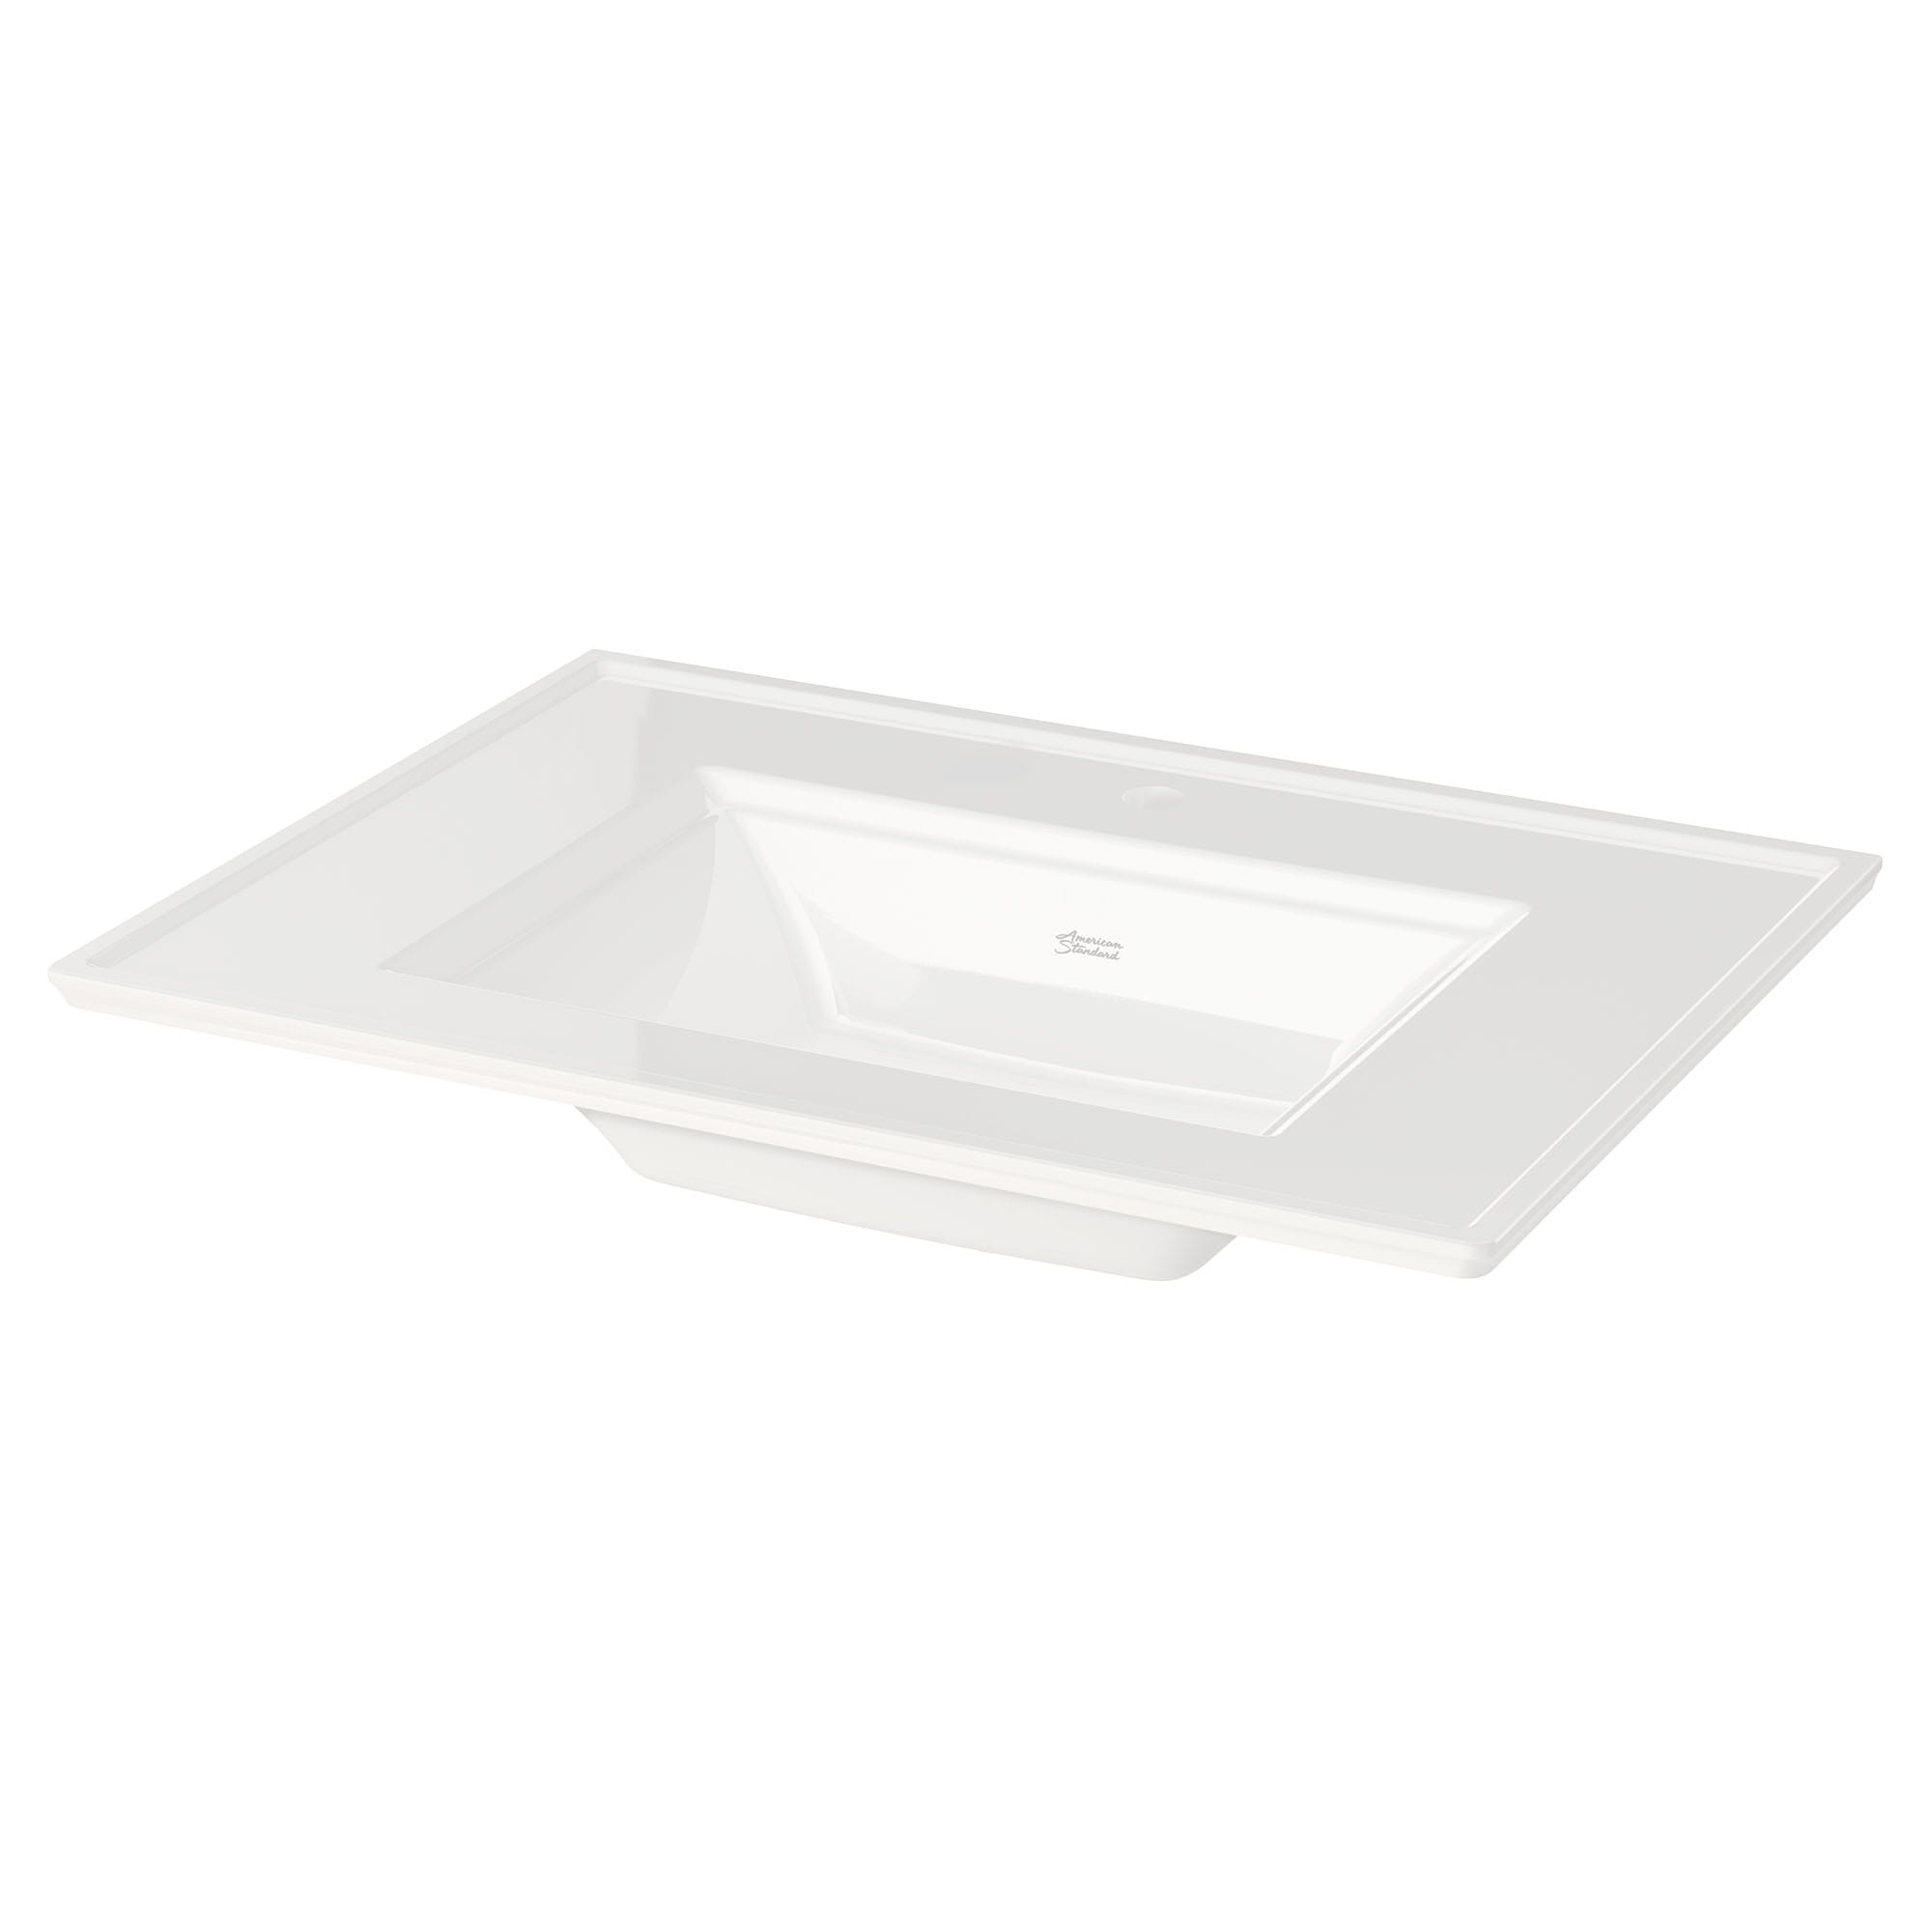 Town Square® S Console Vanity Sink Top Center Hole Only